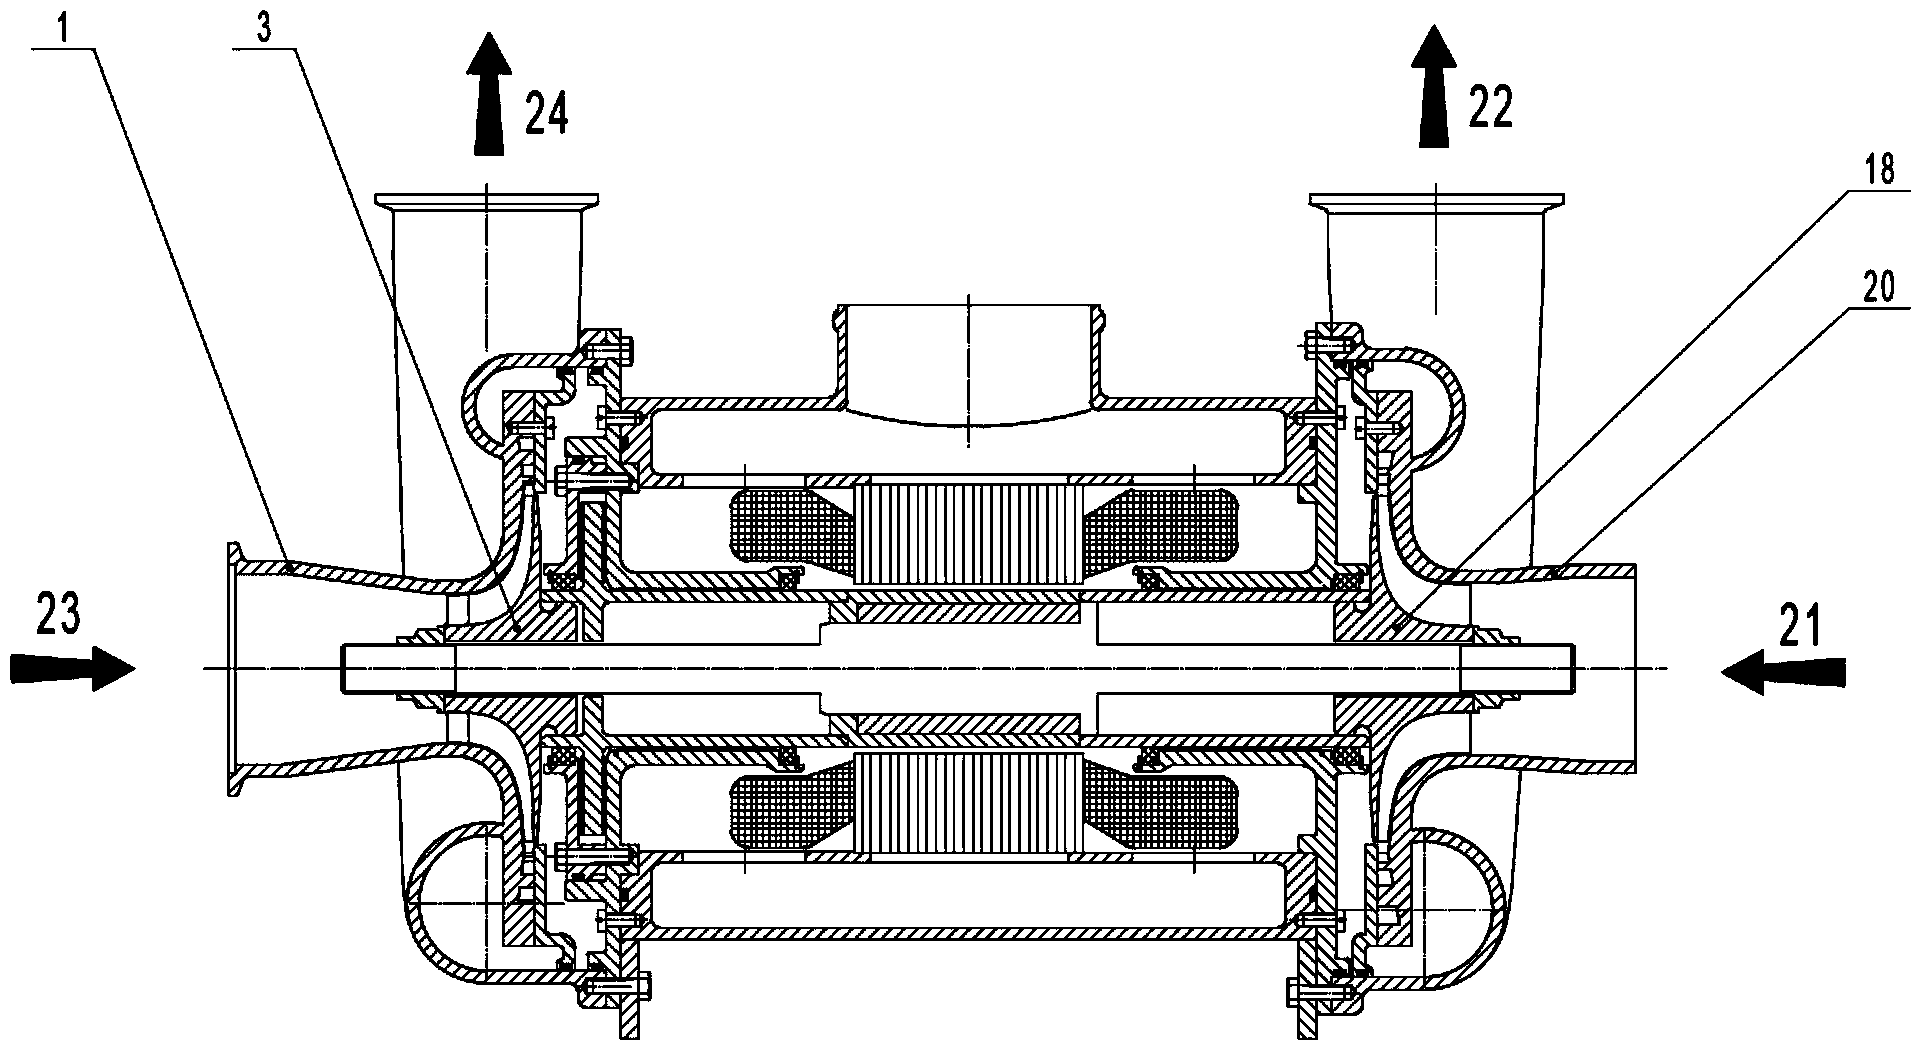 Power-driven gas compressor of novel structure